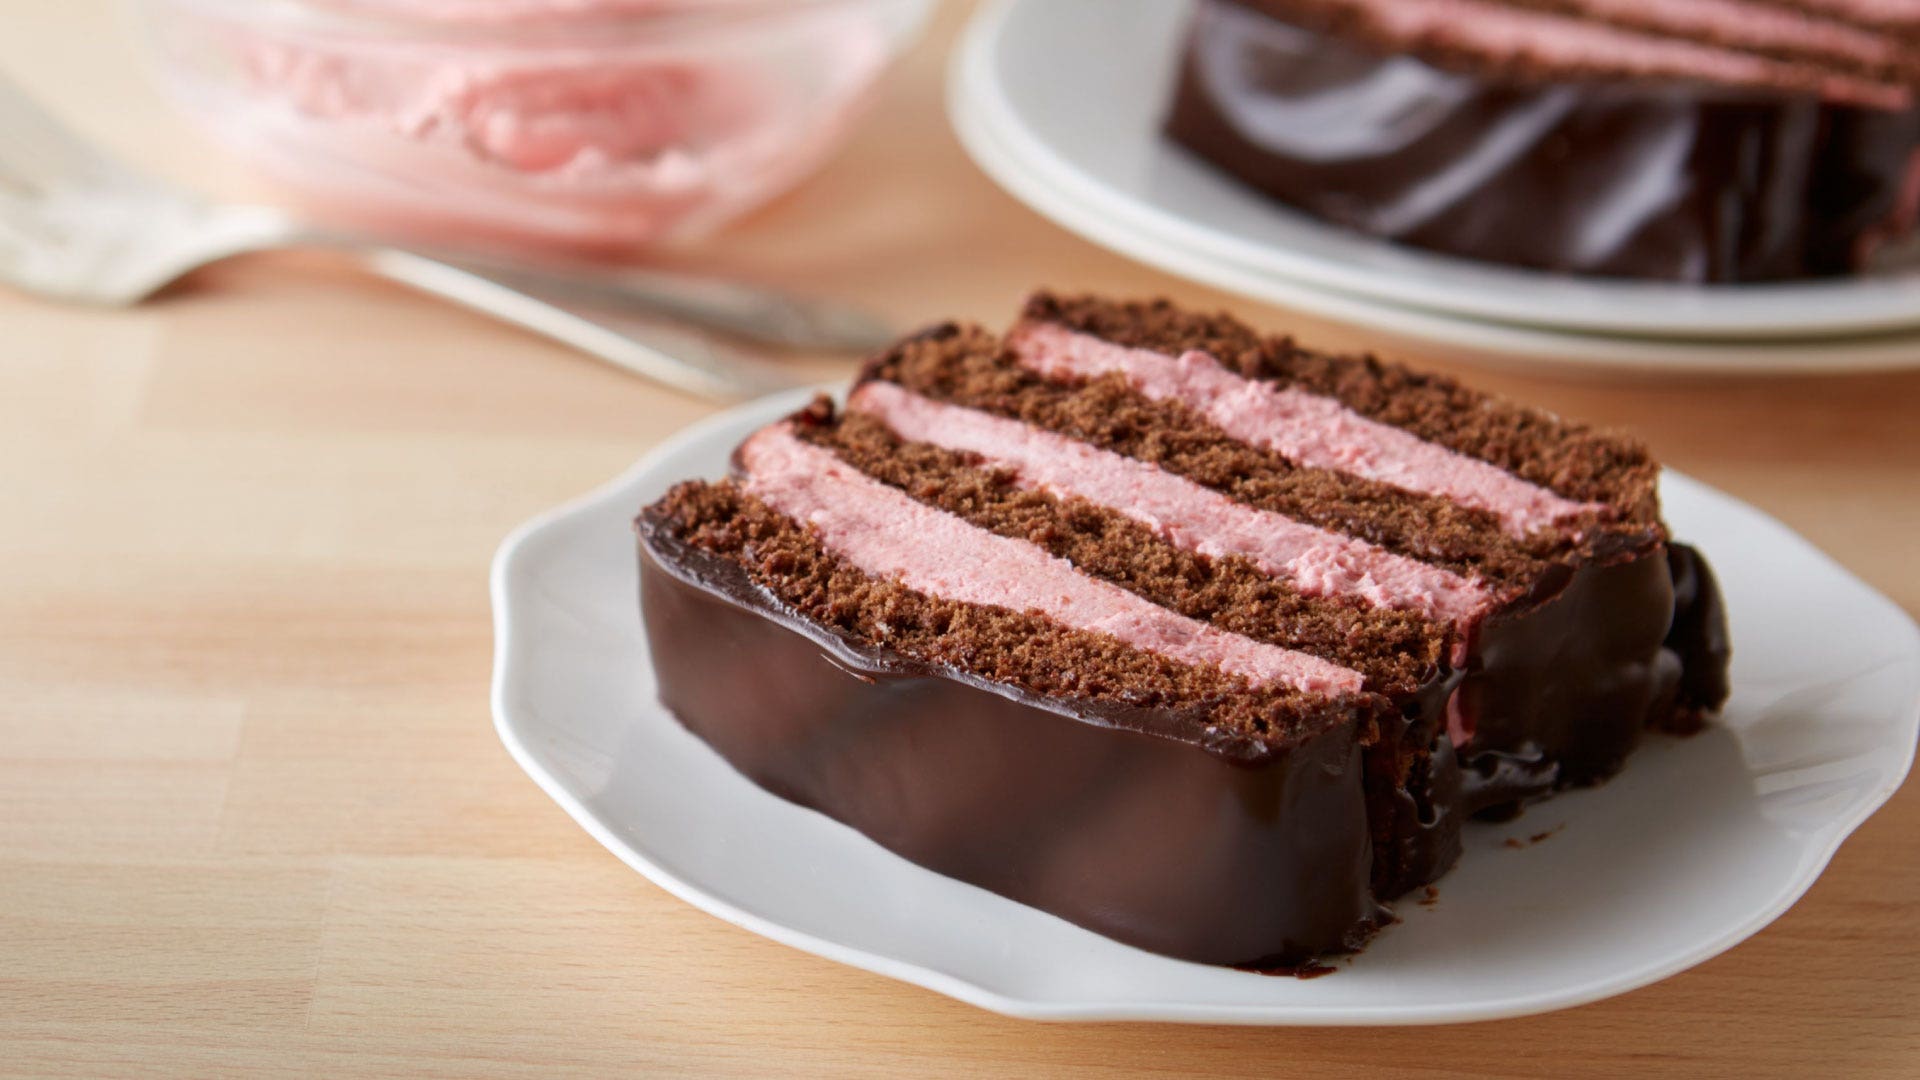 Chocolate Cake With Strawberry Filling - Tasty Treat Pantry